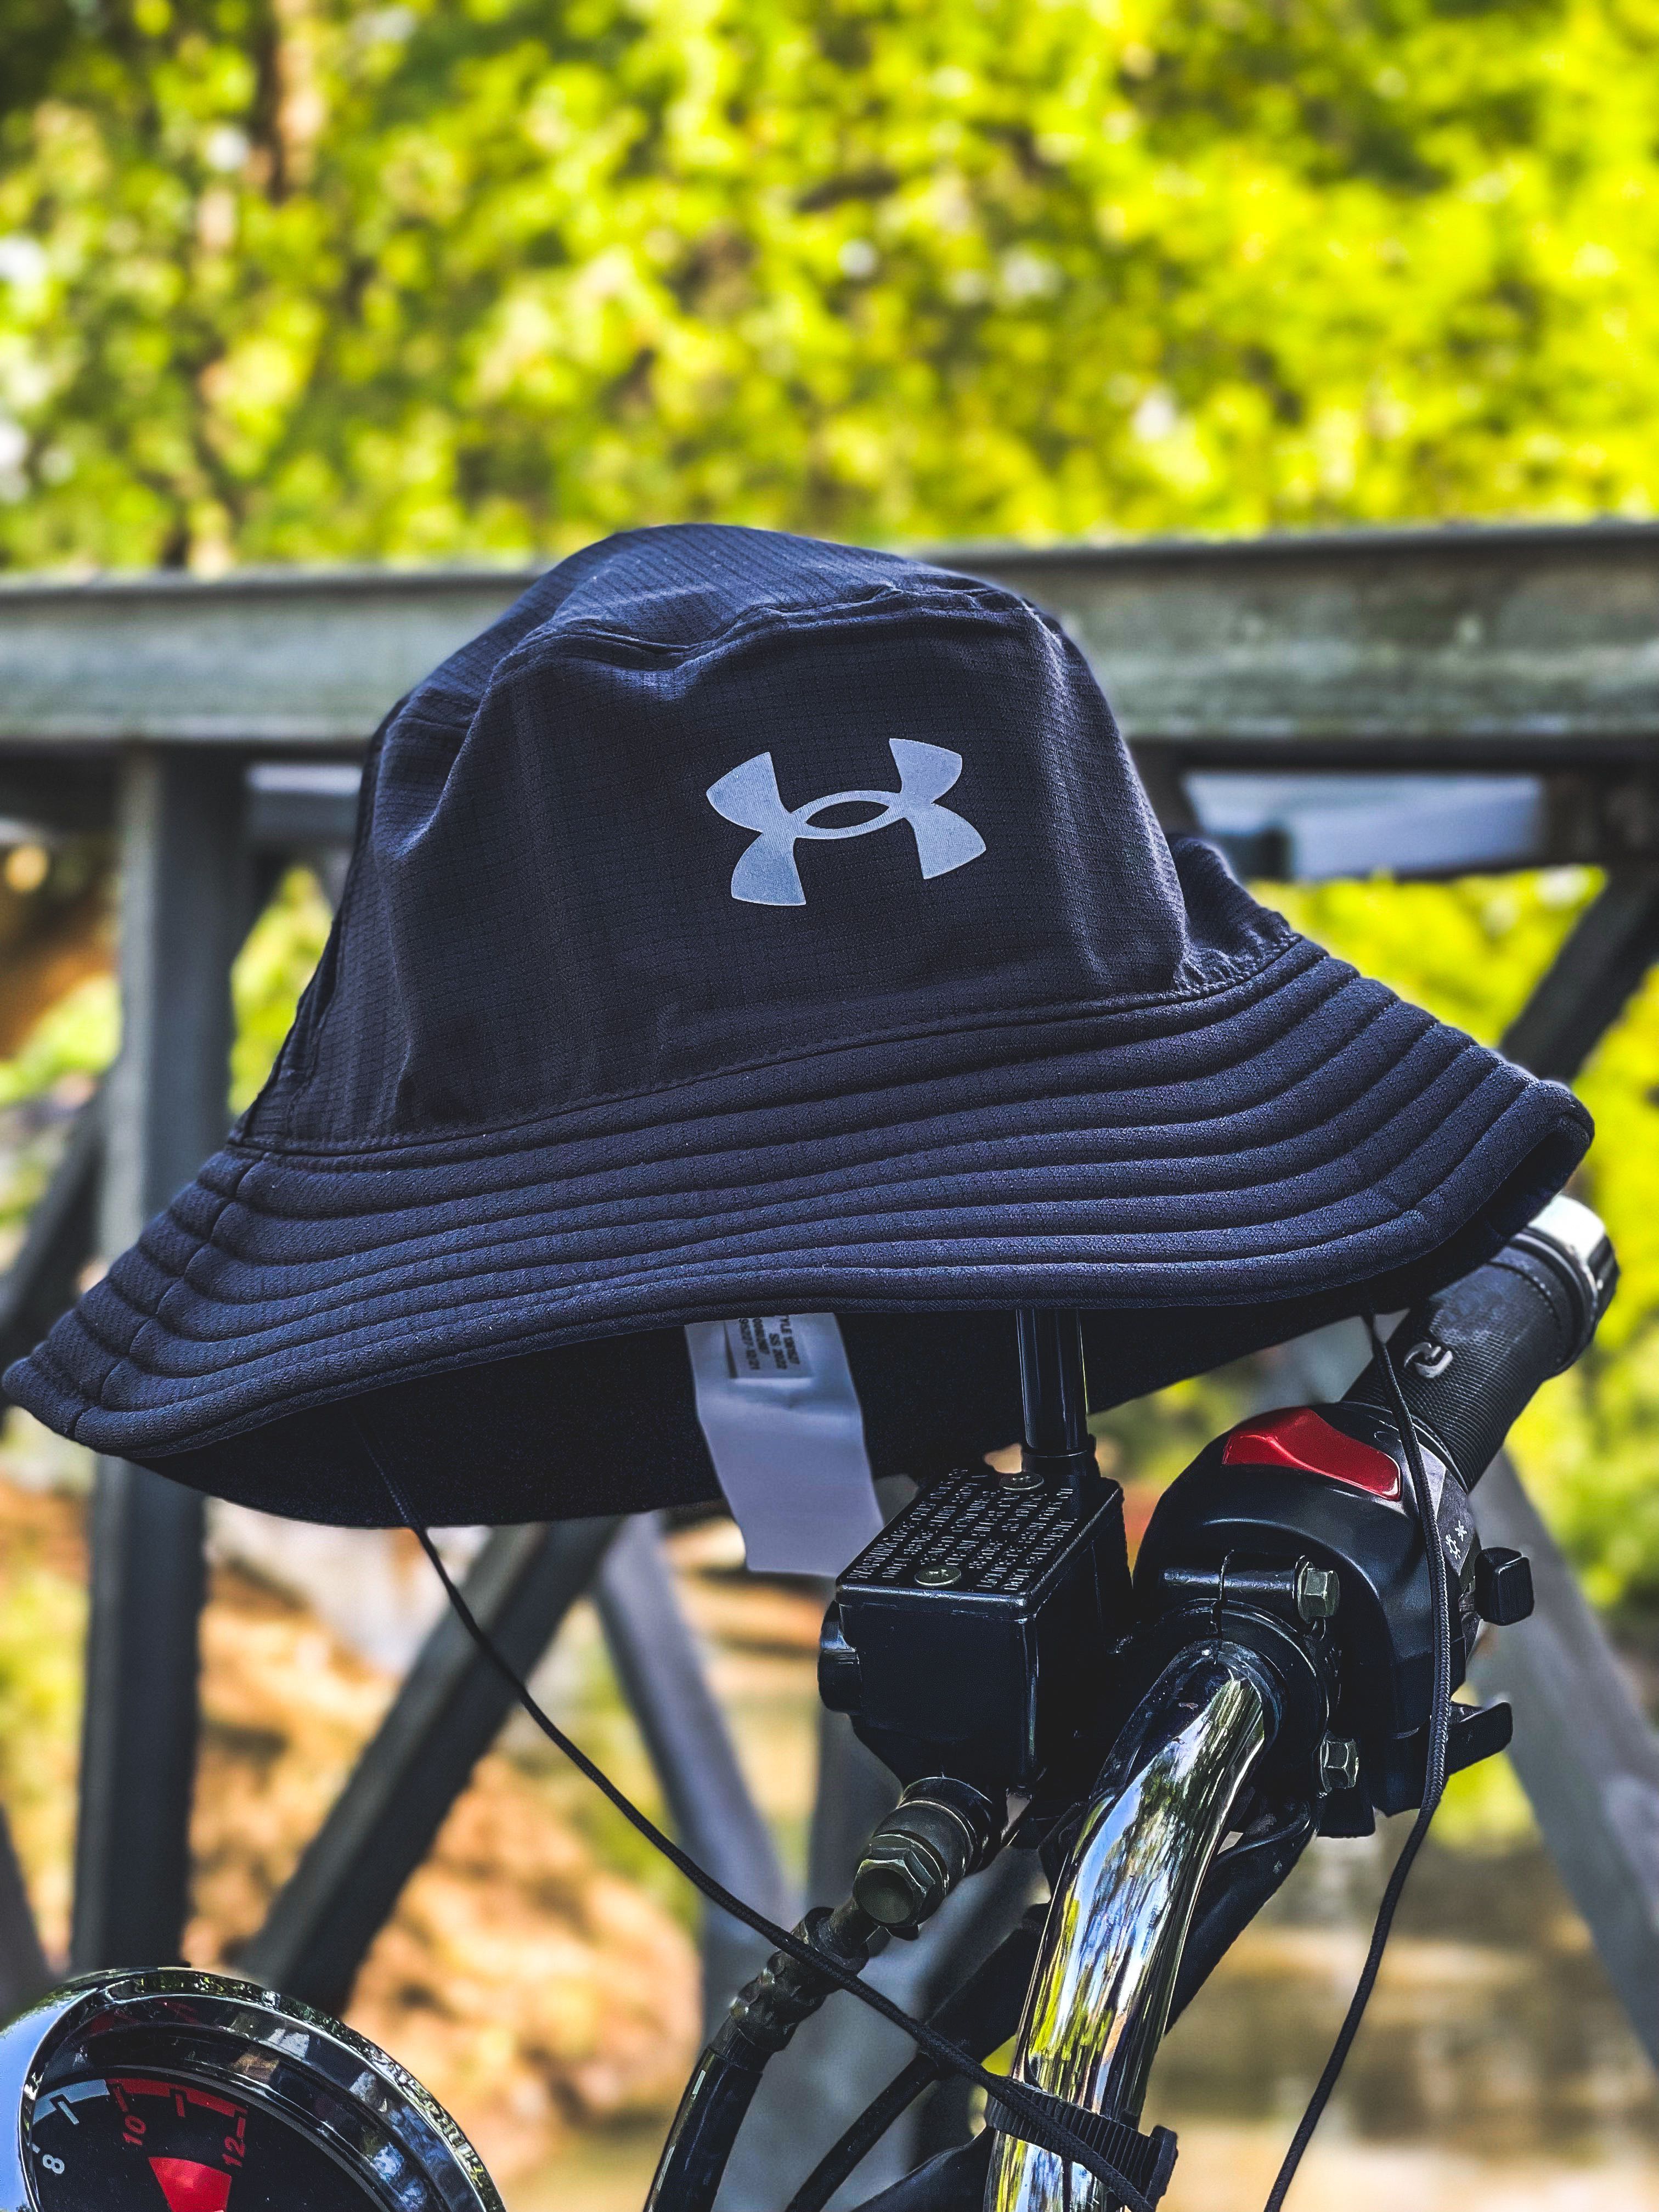 Under Armour Men's Iso-Chill ArmourVent Bucket Hat - Black